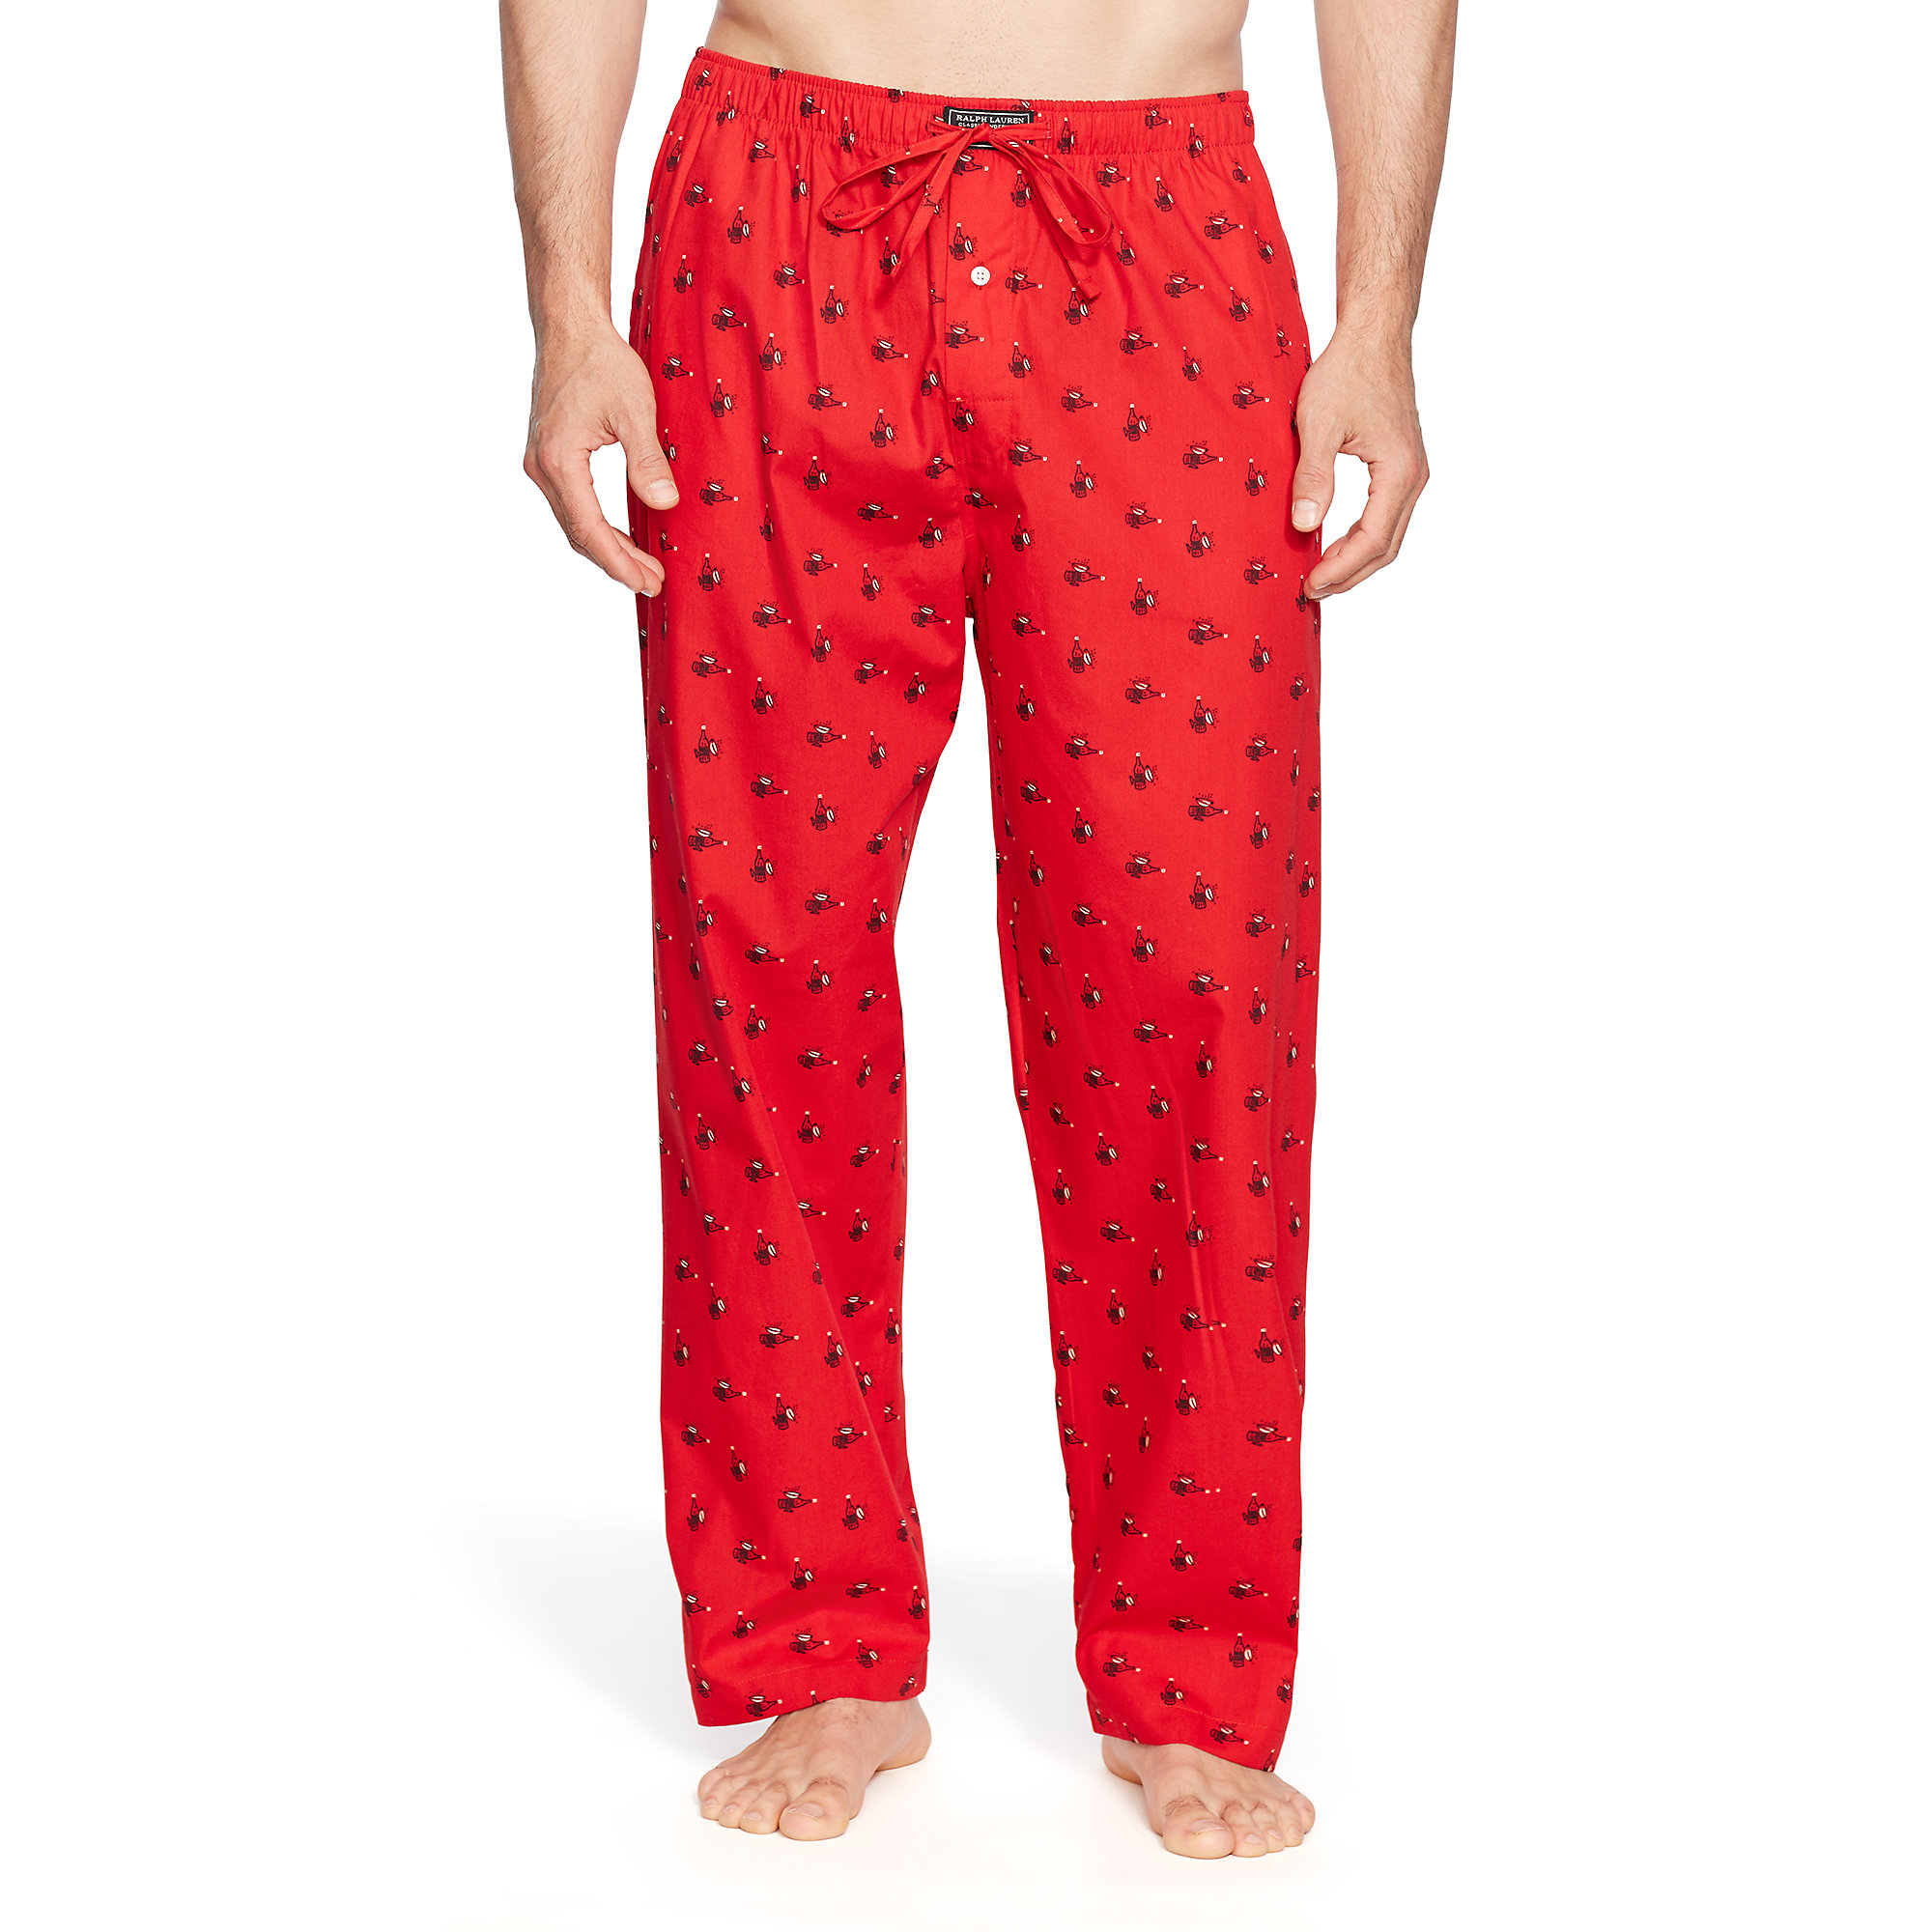 Polo ralph lauren Champagne Print Pajama Pant in Red (red champagne ...